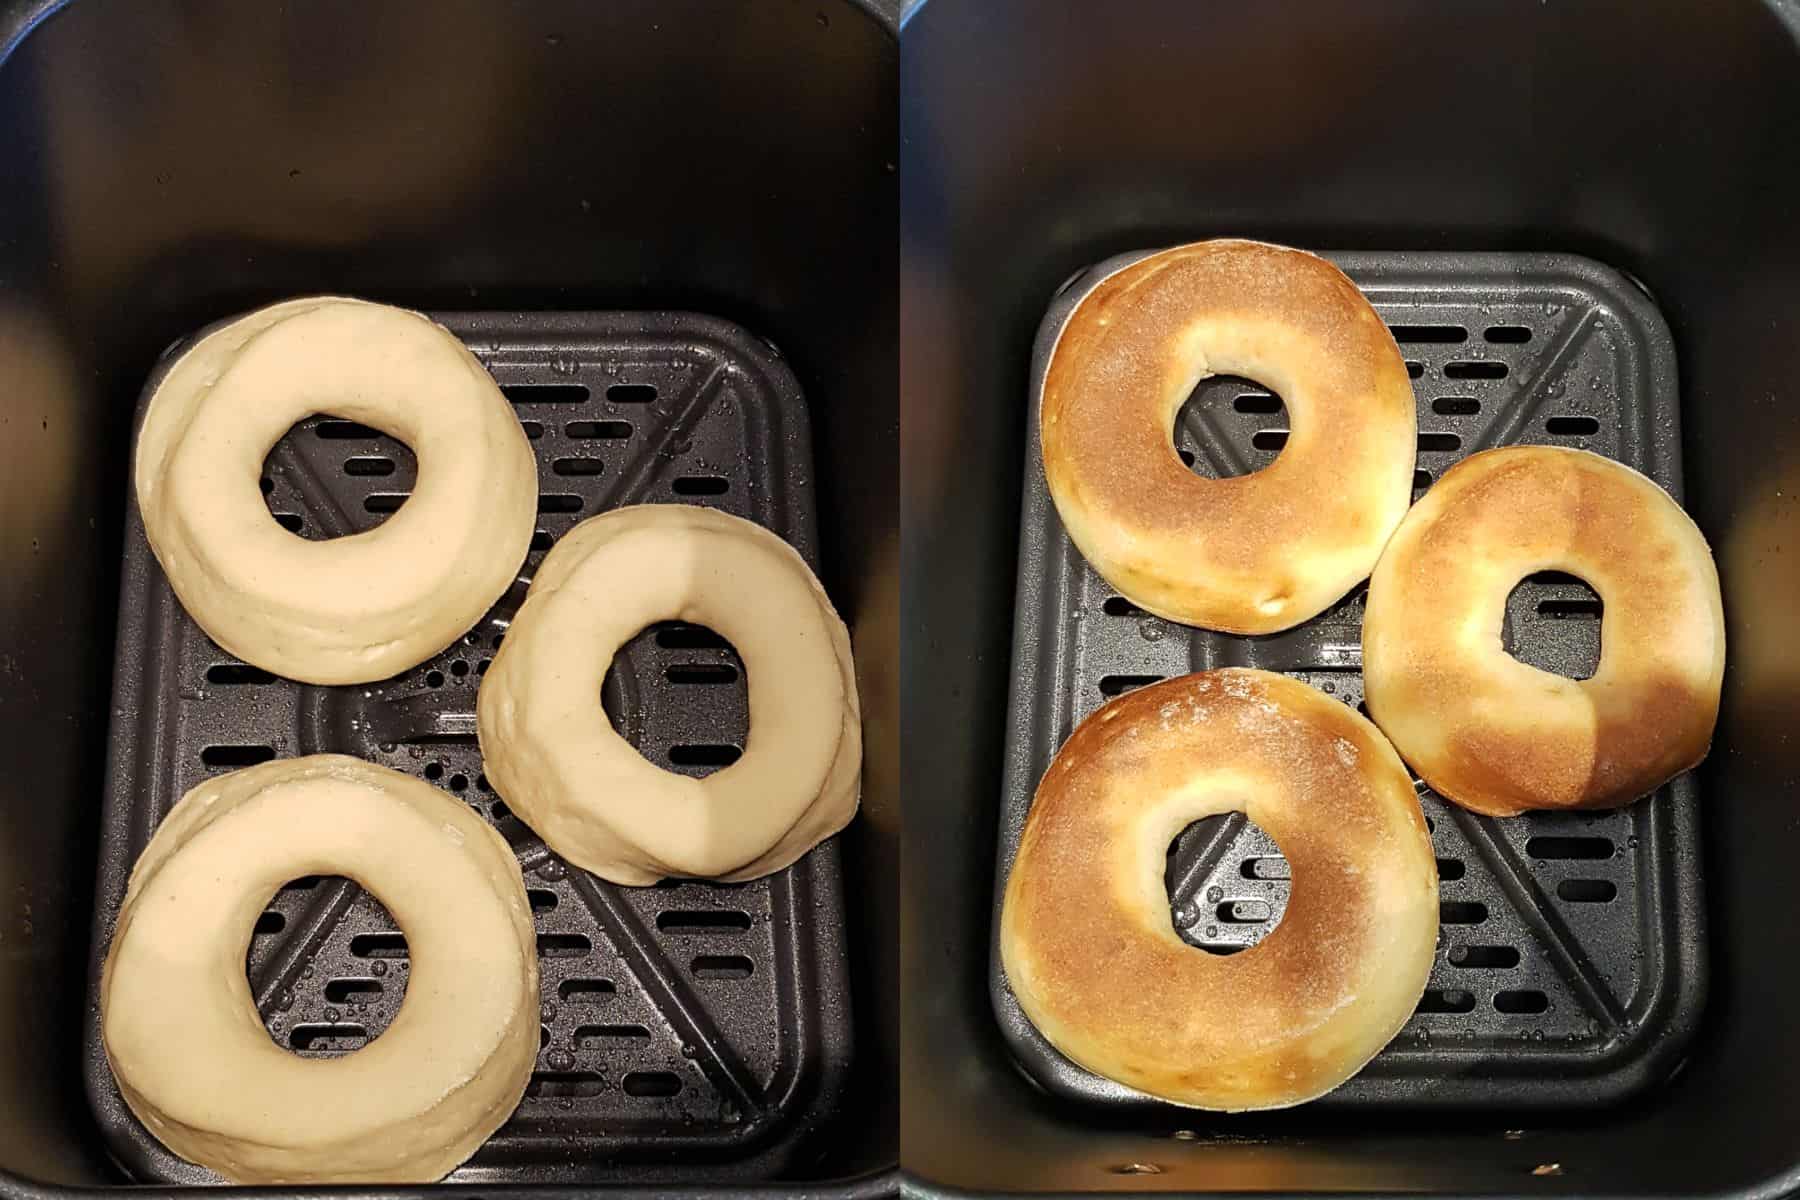 A two image collage of the doughnuts before and after cooking.